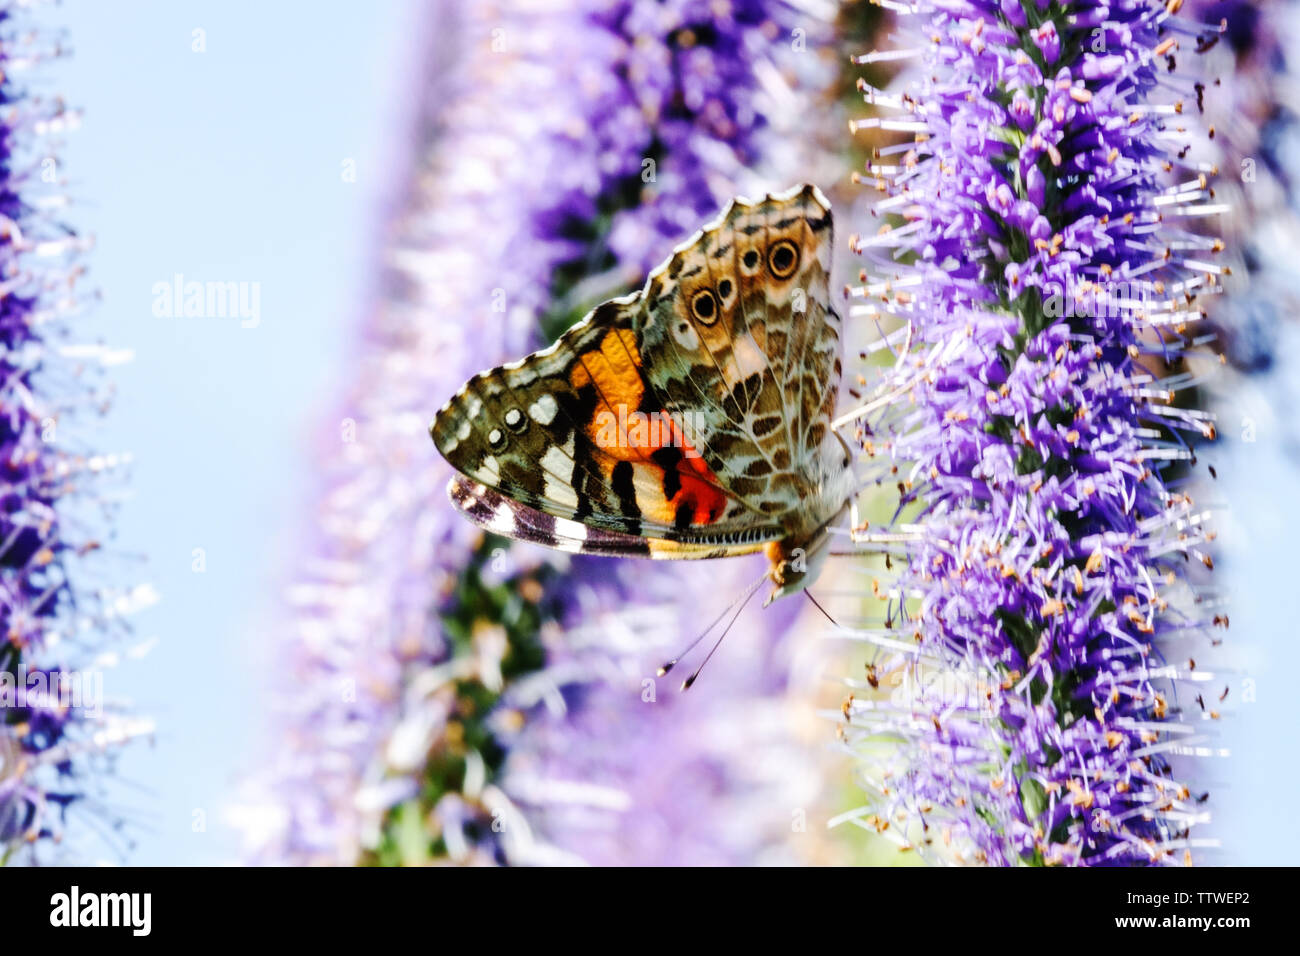 Butterfly on flower close up - Veronicastrum, Painted lady butterfly Vanessa cardui feeding nectar on blue flowers Butterfly garden Stock Photo